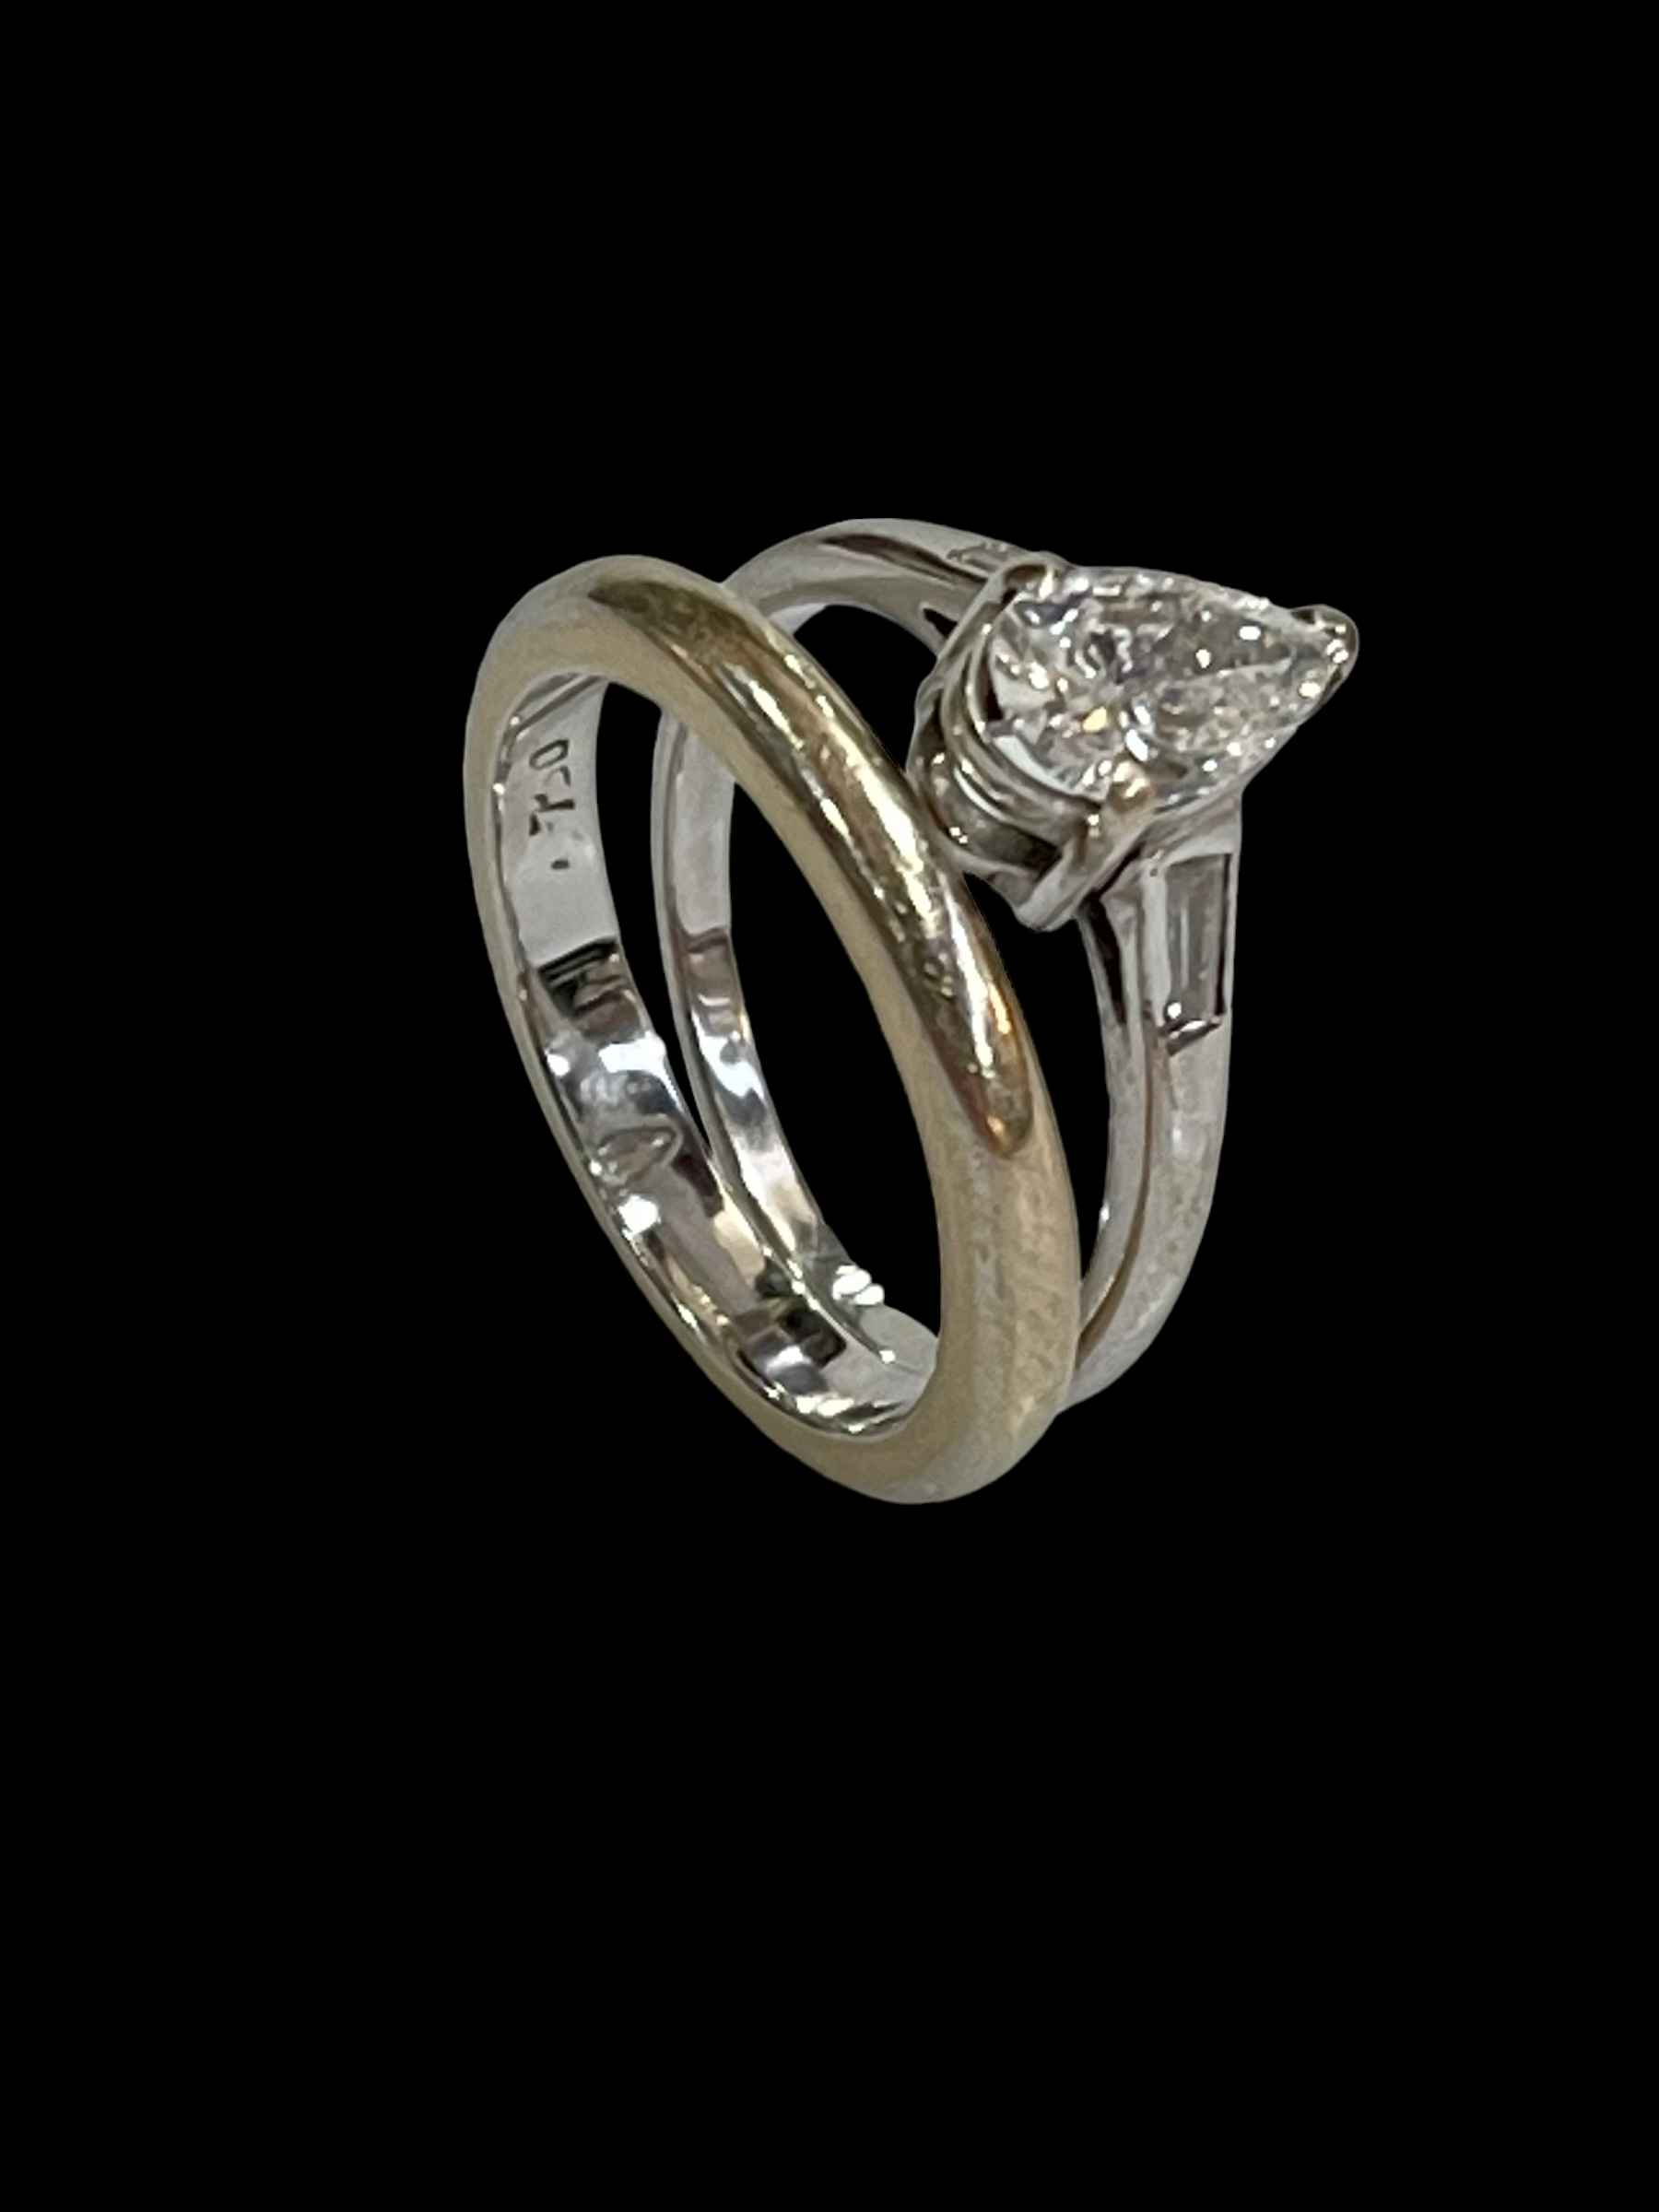 Diamond tear drop 18 carat white gold ring, size N, together with 18 carat white gold wedding band,